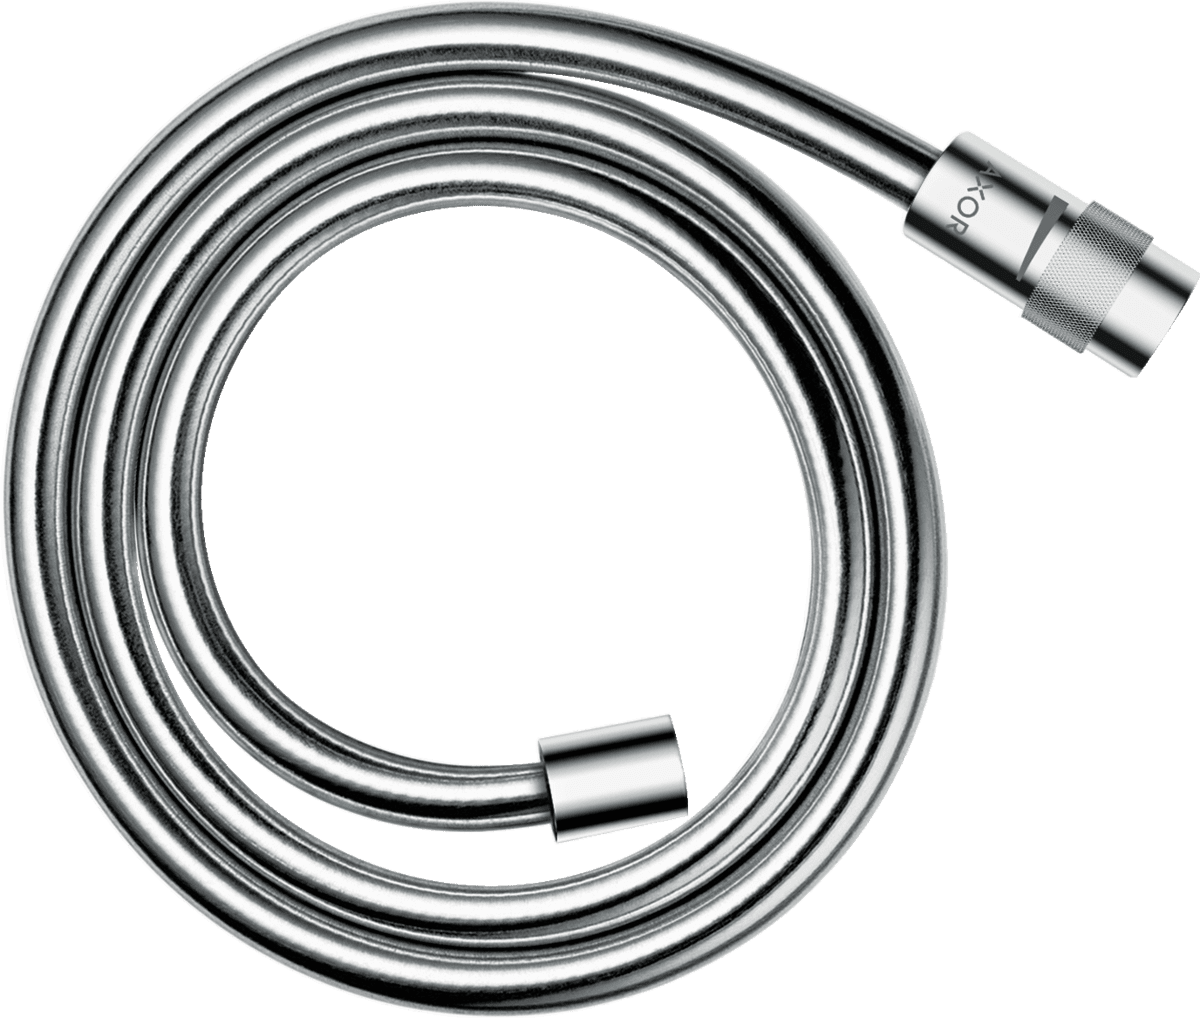 Picture of HANSGROHE Shower hose 1.25 m with volume control #28127820 - Brushed Nickel